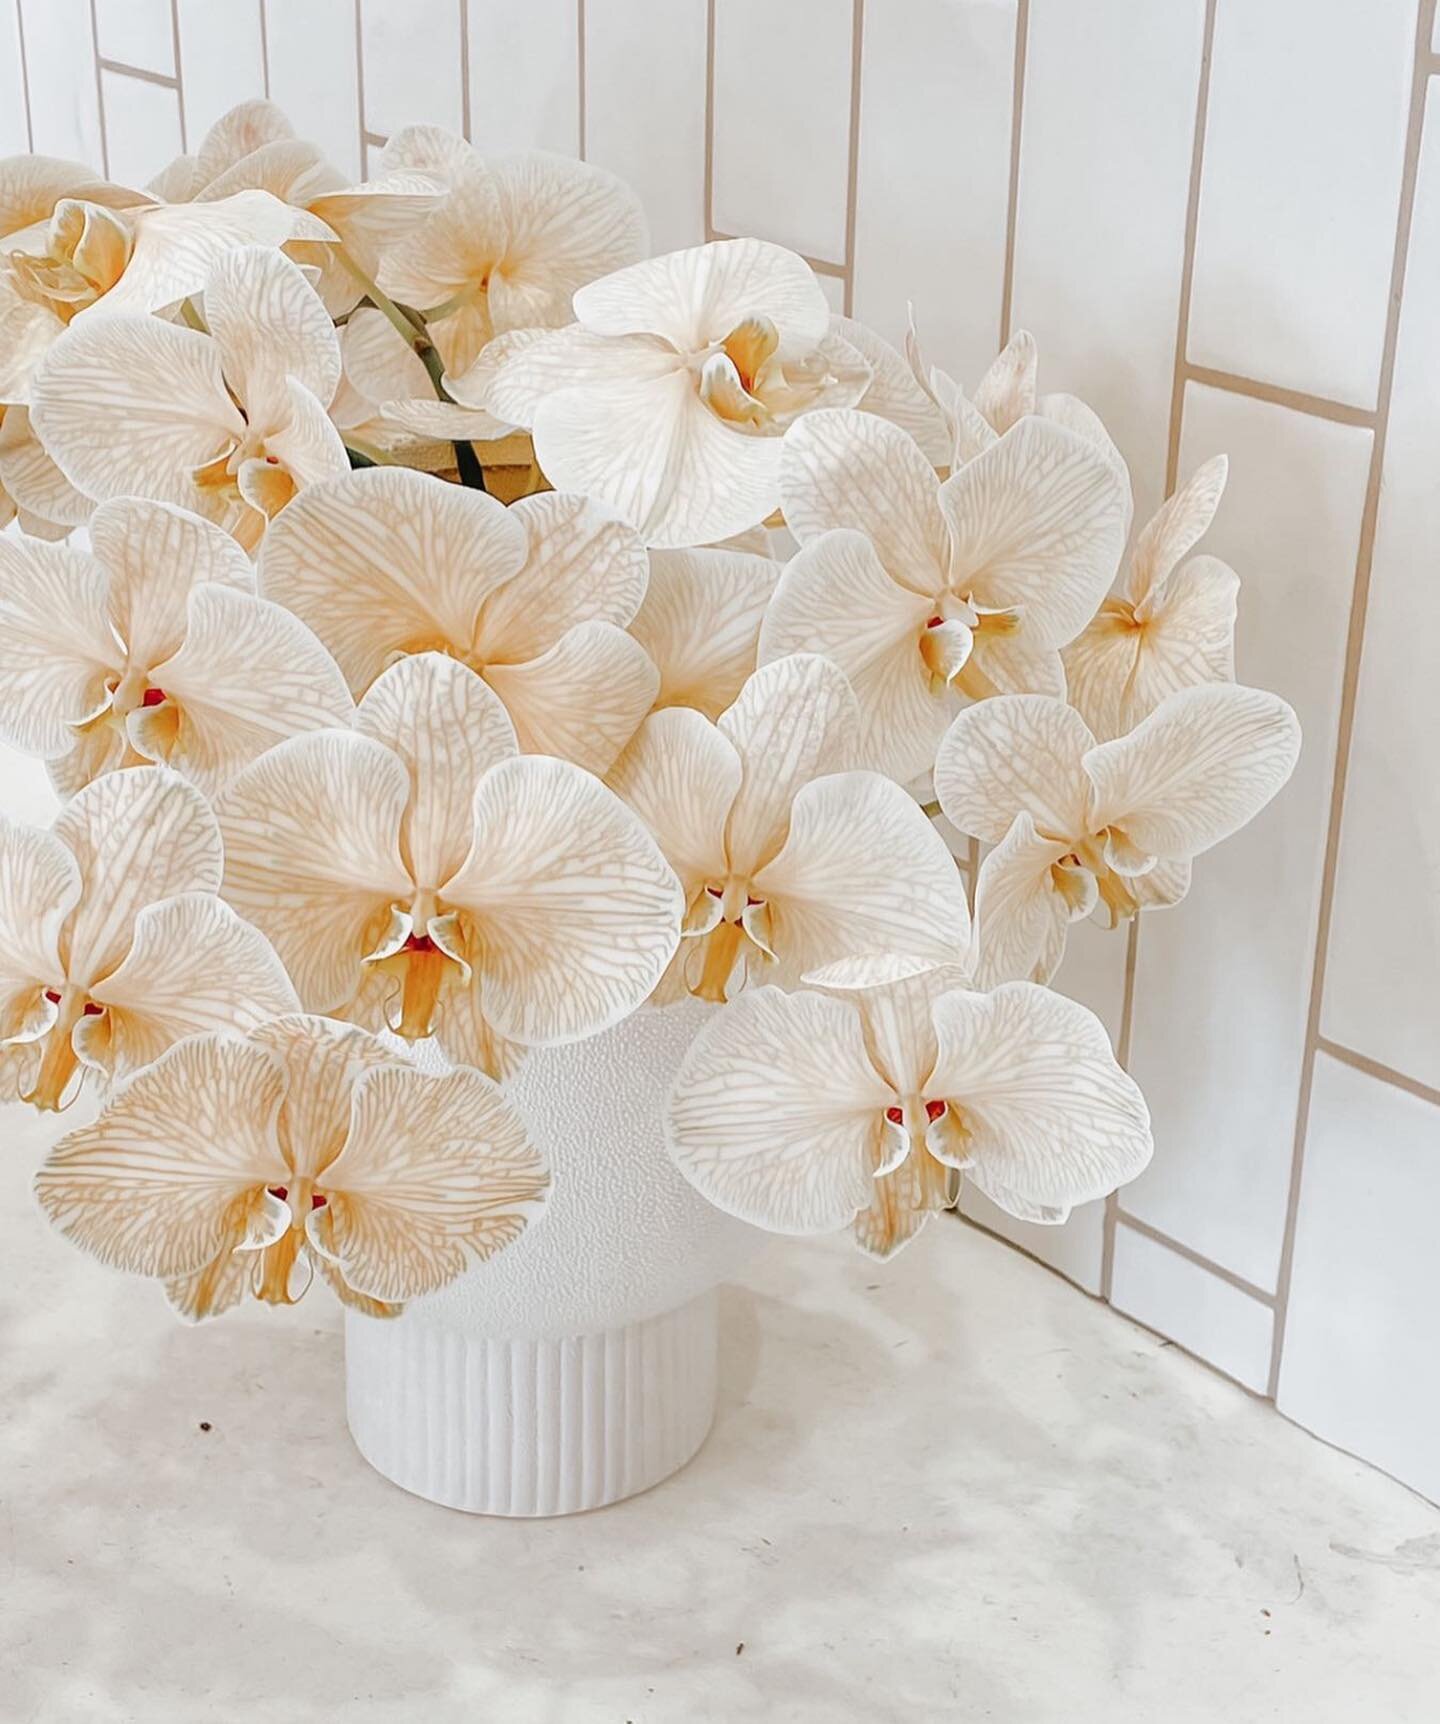 We  are obsessing over these Orchids by @mapleflowersdecor ✨😍 

What florals do you envision for your big day? 🤩